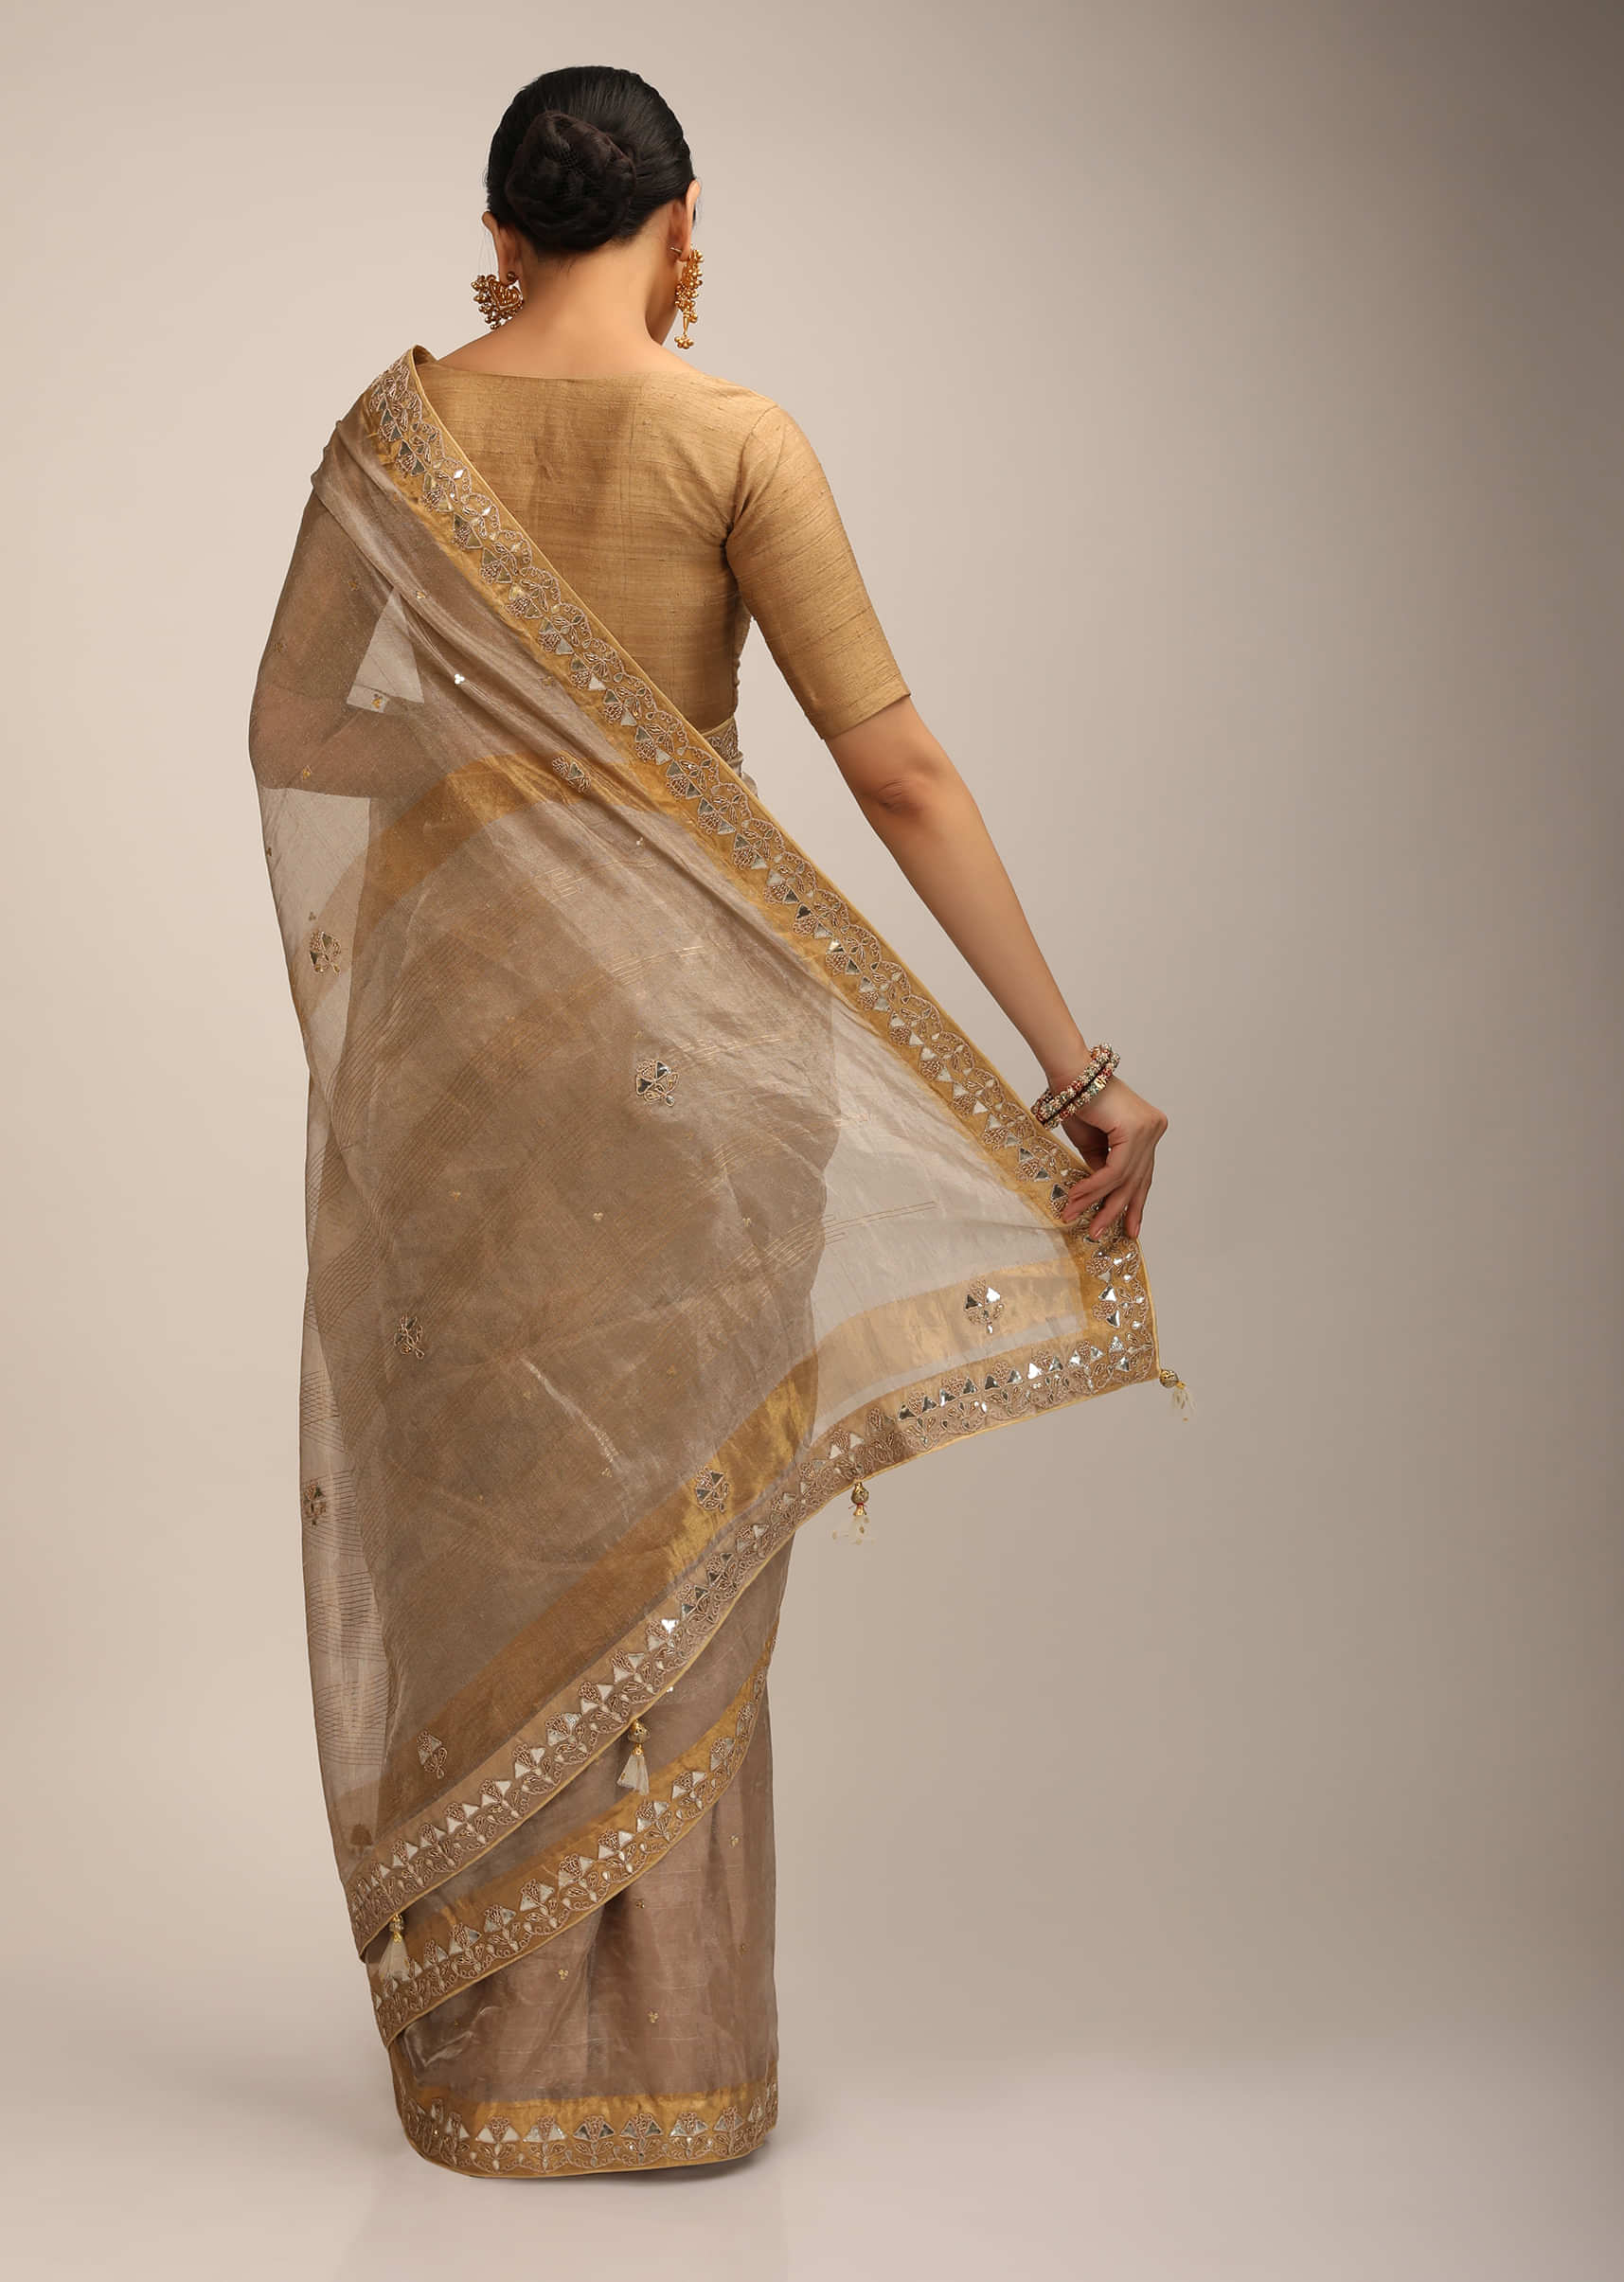 Taupe Gold Saree In Shimmer Tussar Silk With Gotta Patti Embroidery